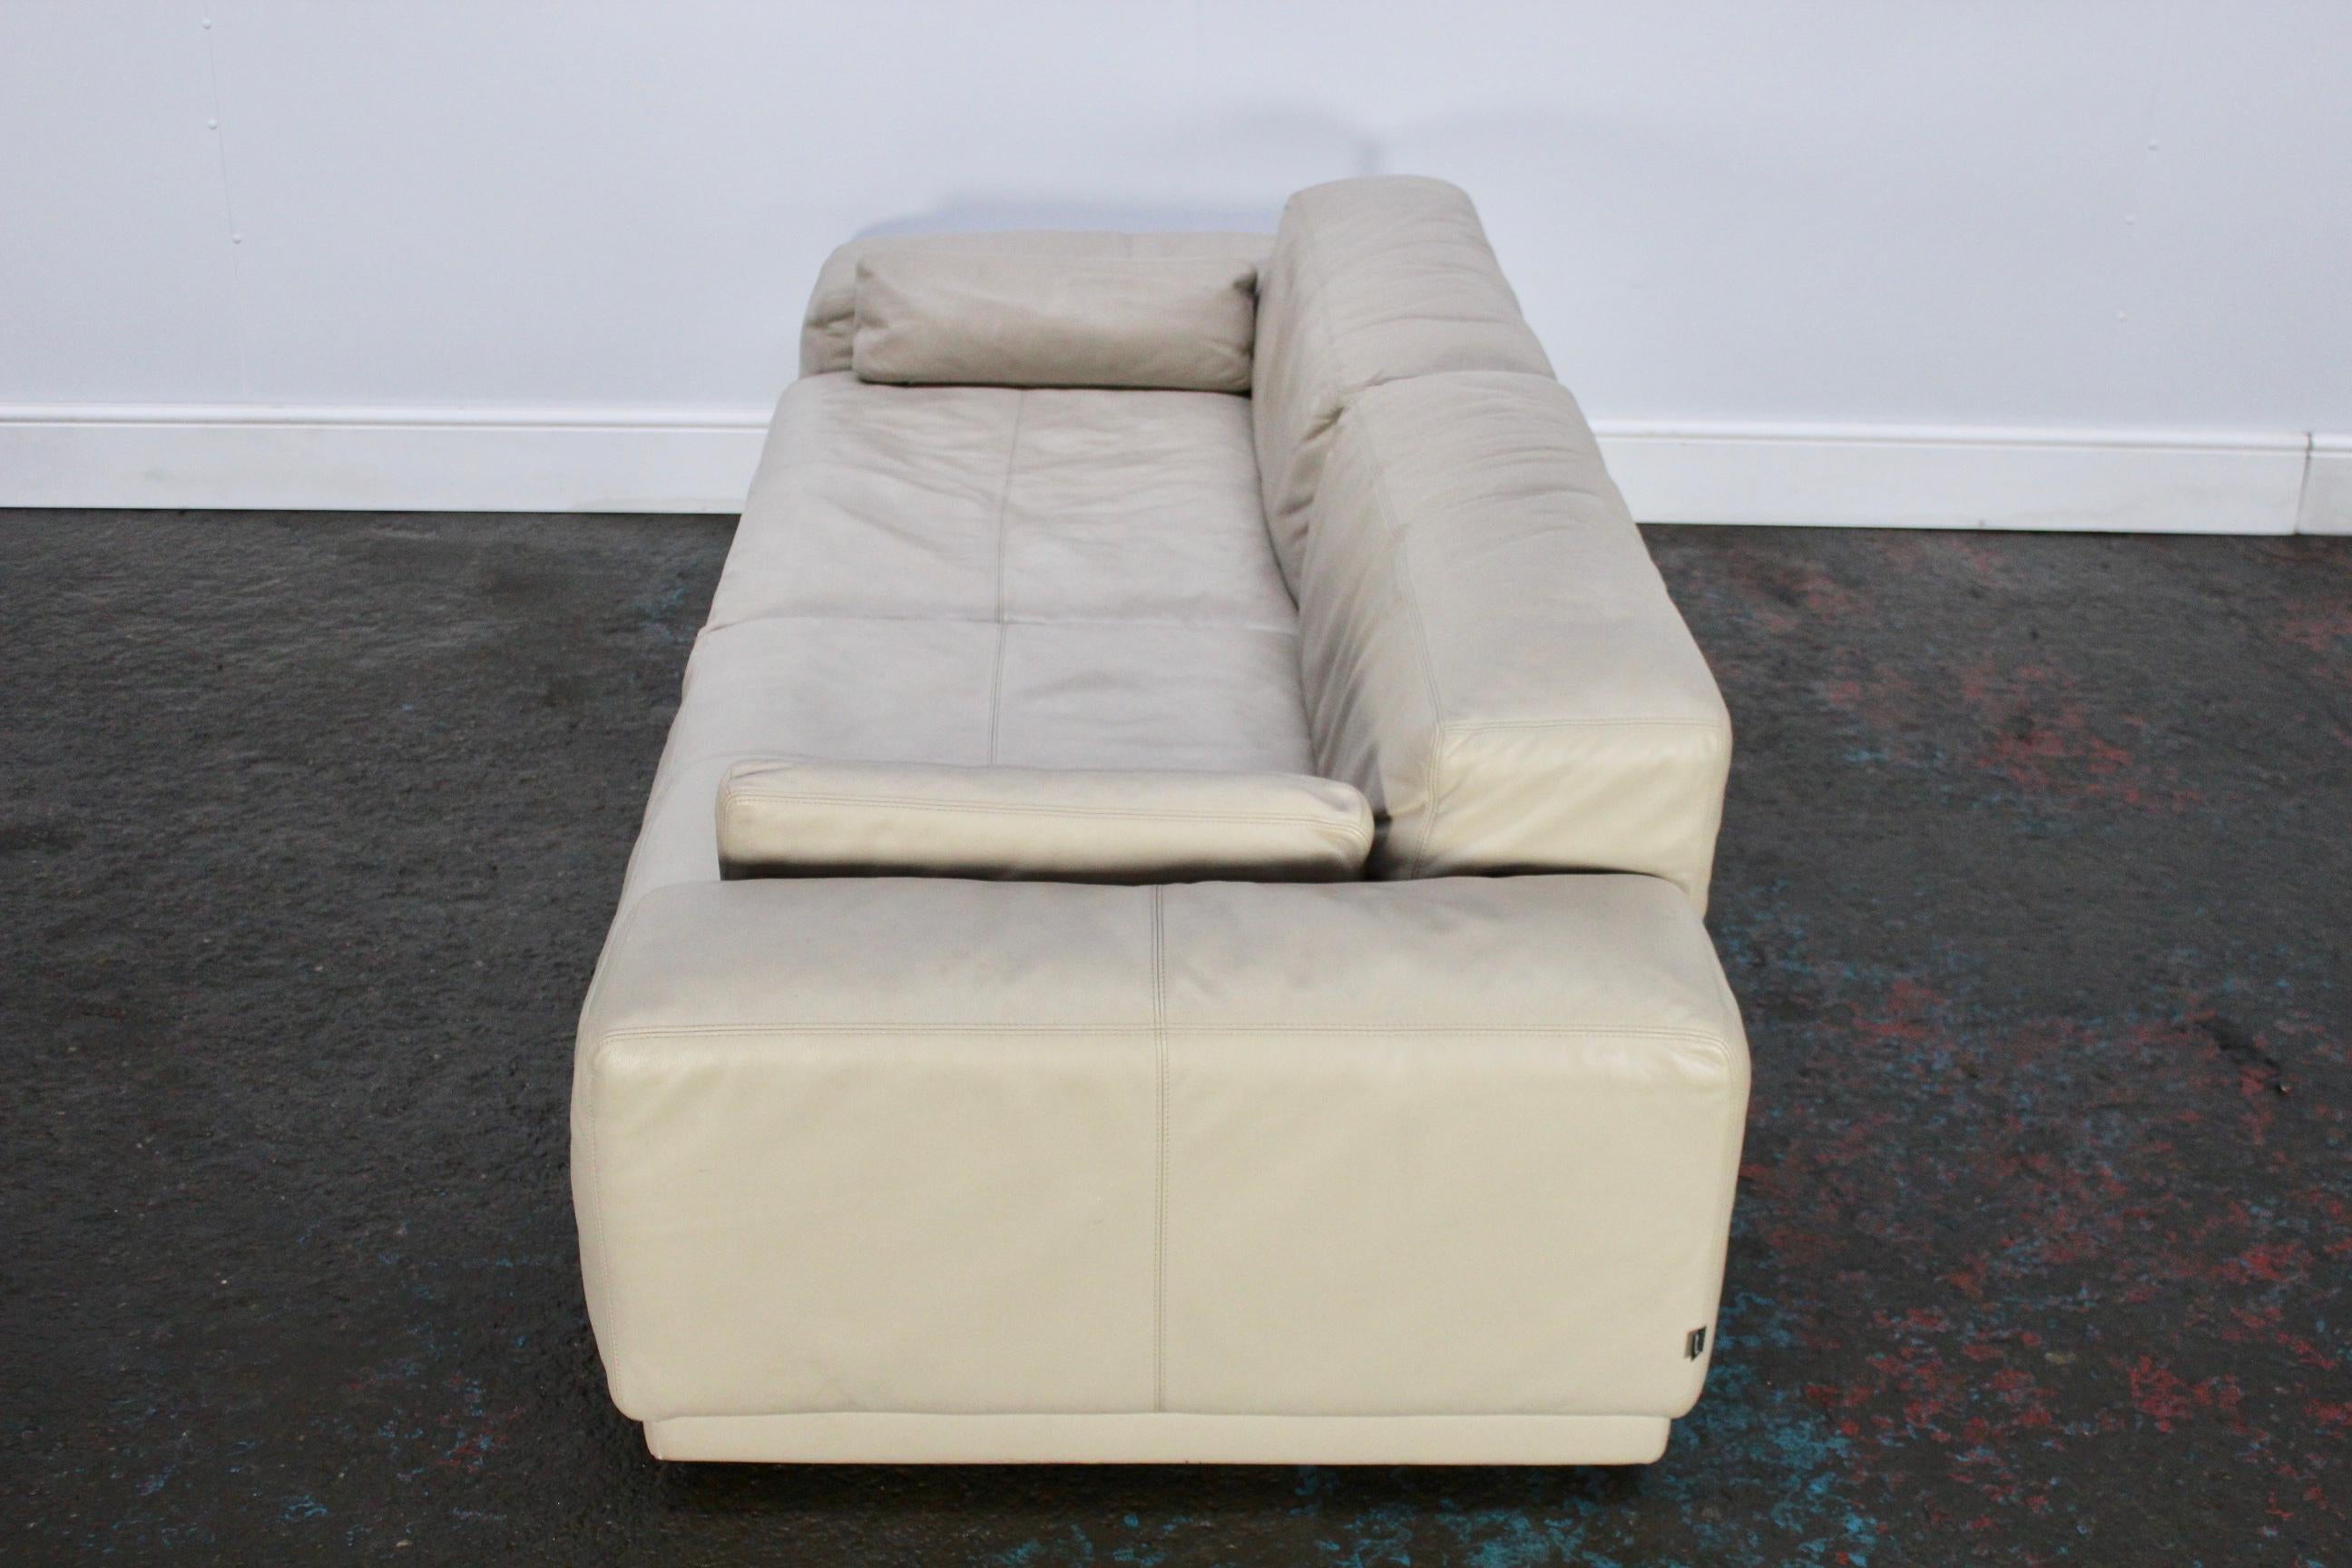 Swiss Vitra “Place” Two-Seat Sofa in Ivory Leather by Jasper Morrison